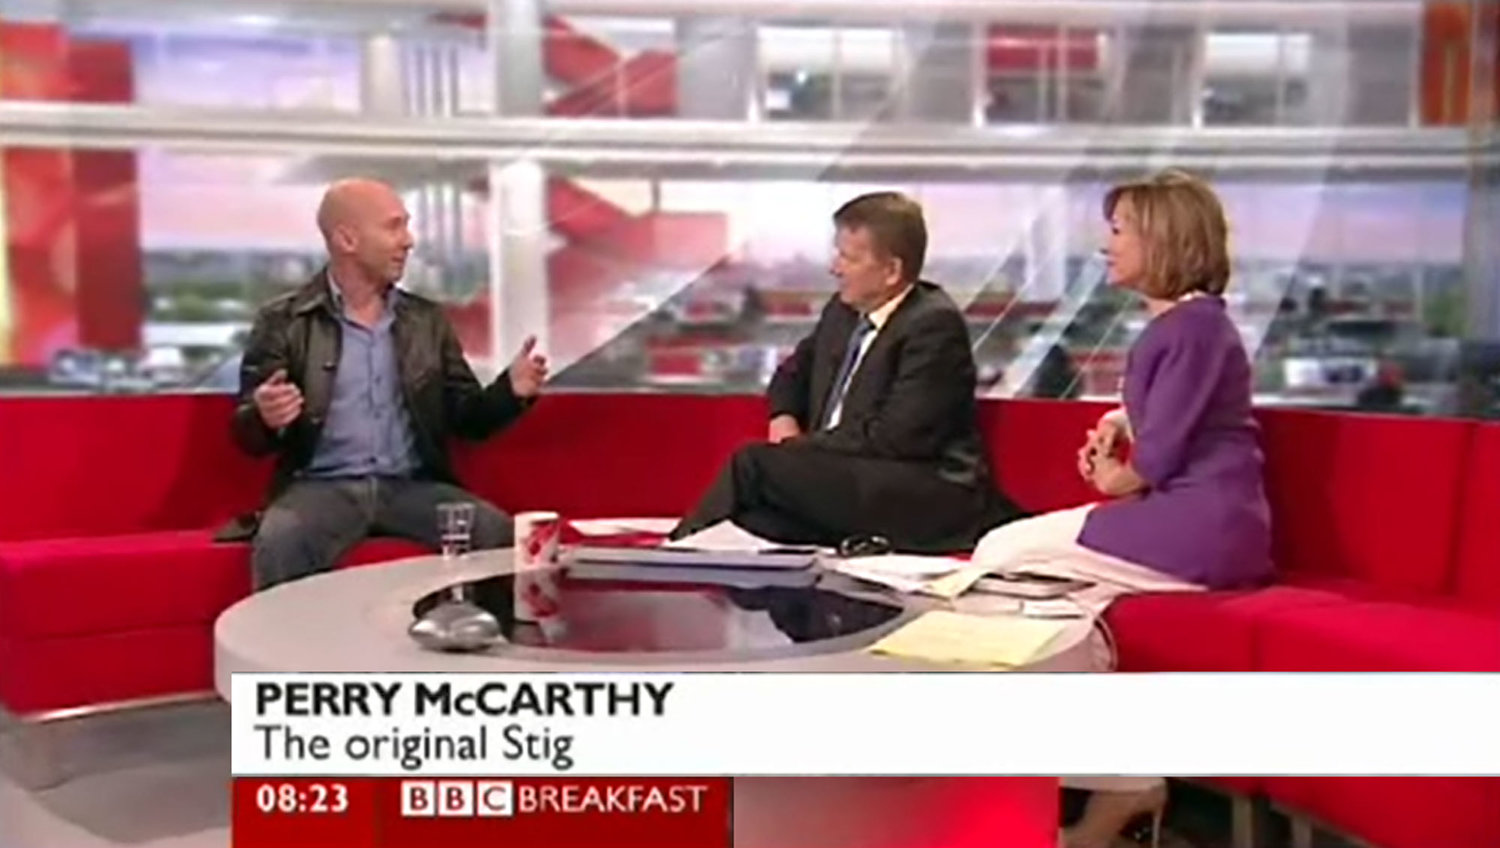 Nonsens Guggenheim Museum pakke Video: Perry appears on BBC News' Breakfast Show to discuss his time with  BBC's “Top Gear” as their original Stig. — Perry McCarthy